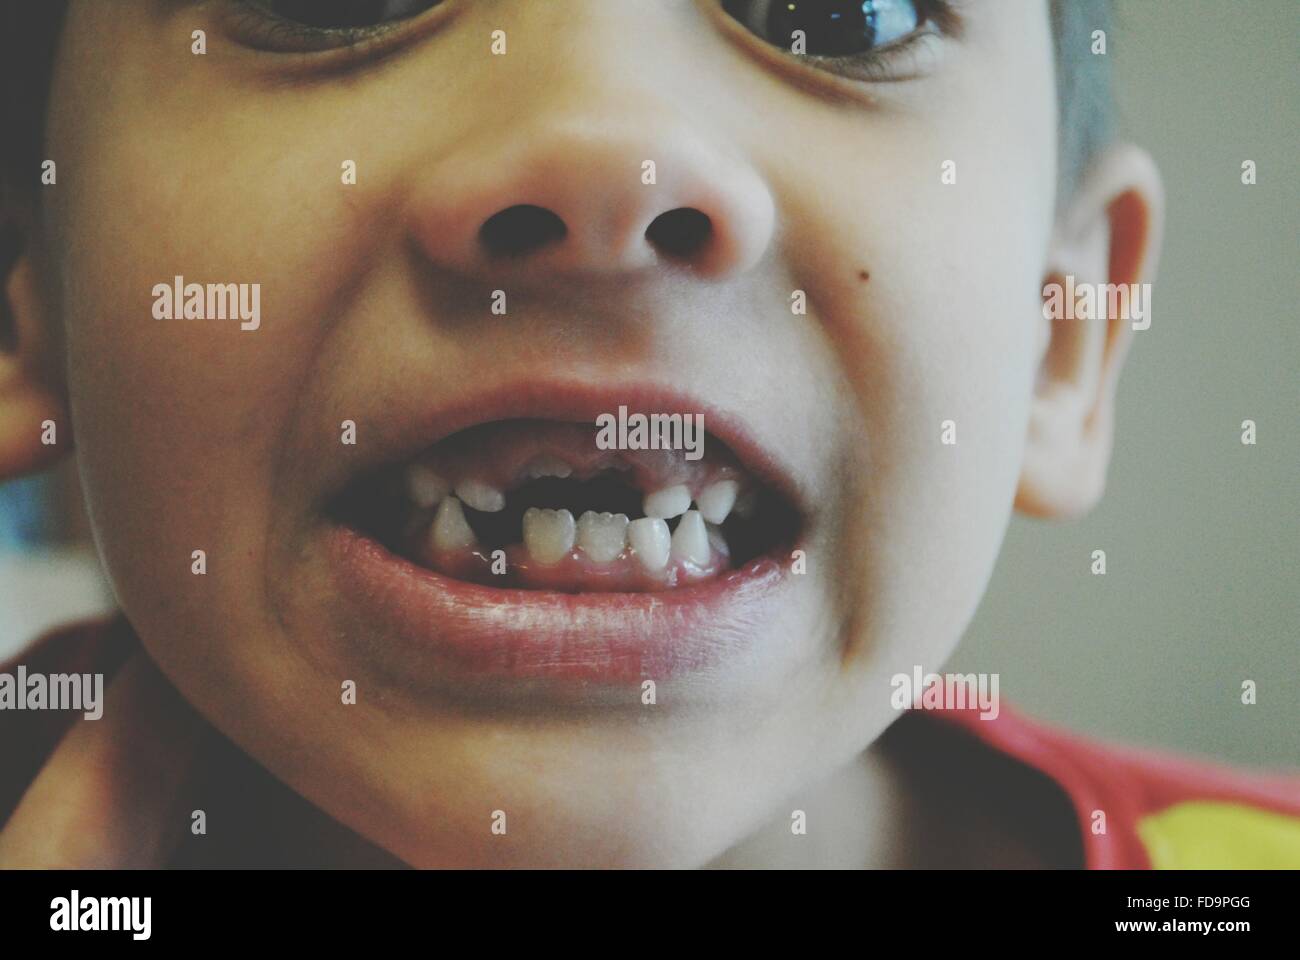 Close-Up Of Boy With Missing Tooth Stock Photo